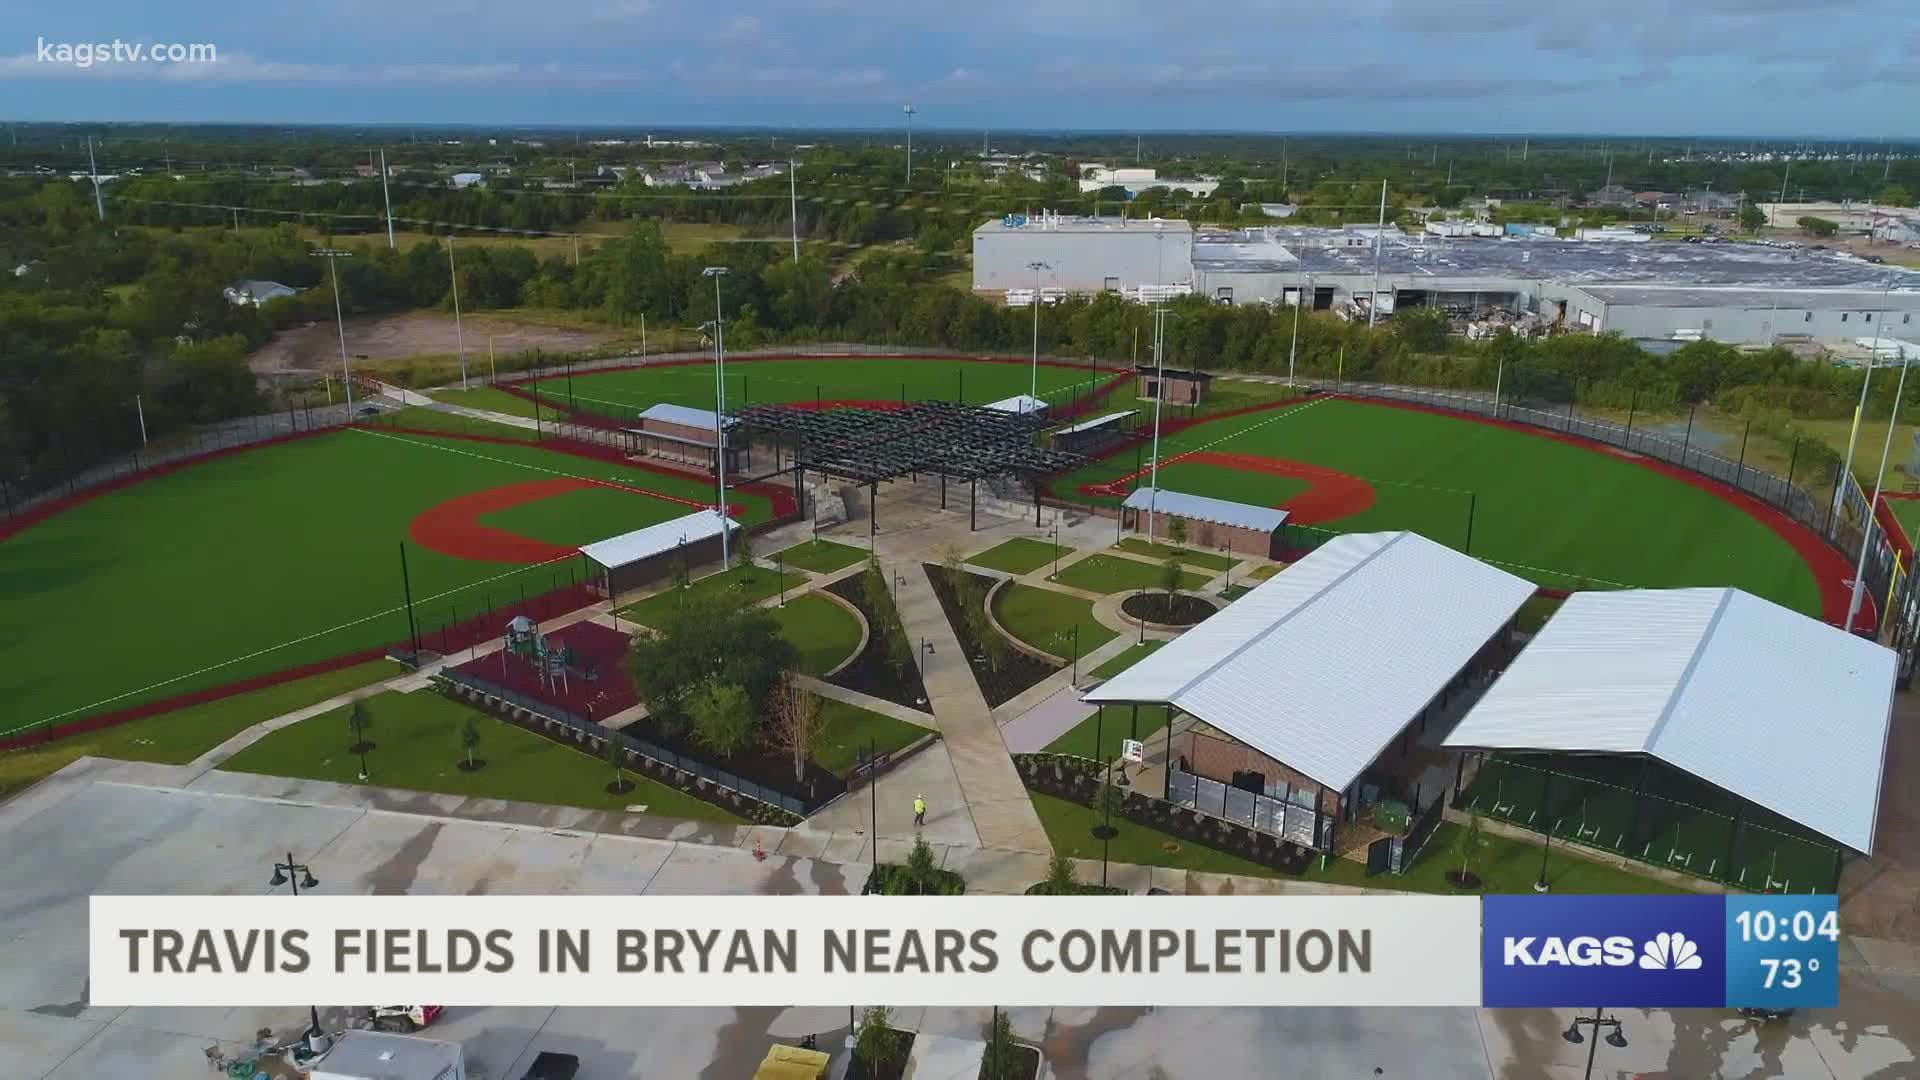 According to officials, Travis Fields will be a hot spot for sports, entertainment, and family fun in the future.